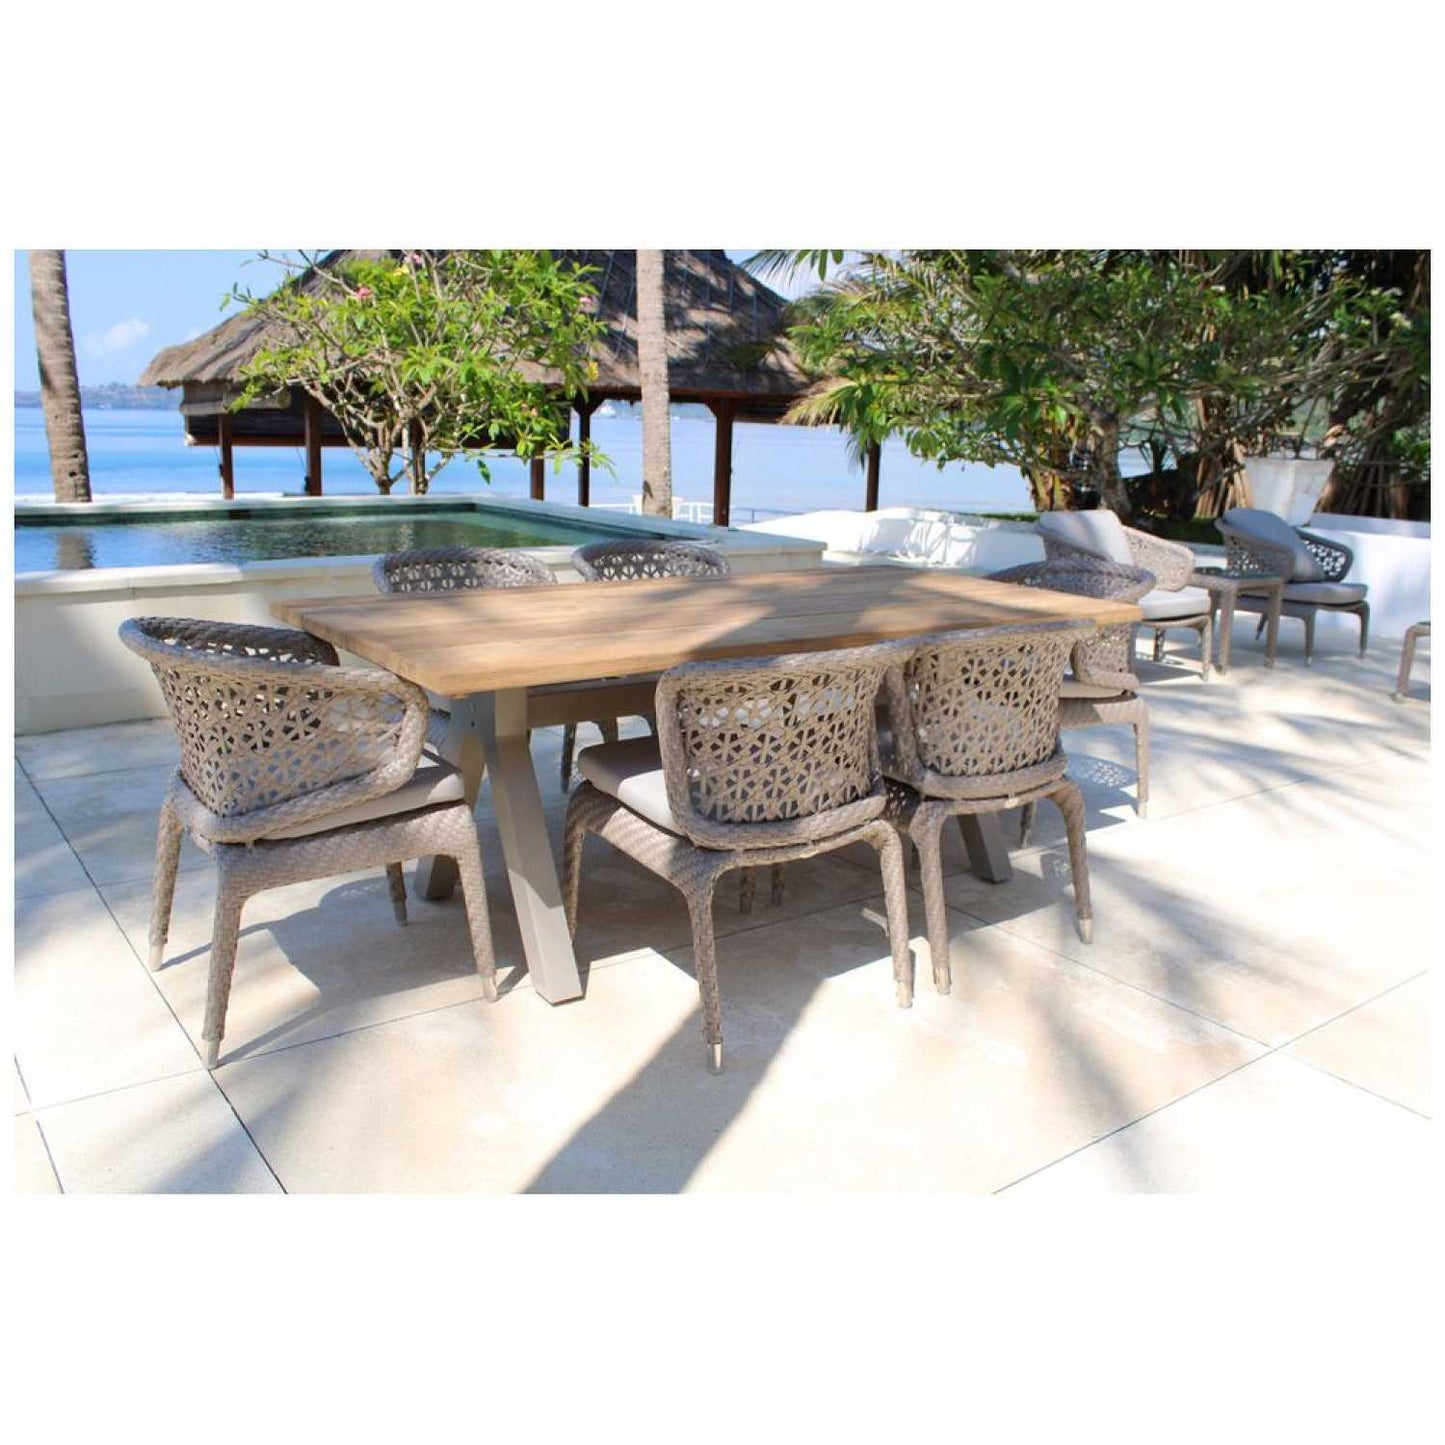 Journey Silver Walnut Dining Chair - PadioLiving - Journey Silver Walnut Dining Chair - Outdoor Dining Chair - PadioLiving